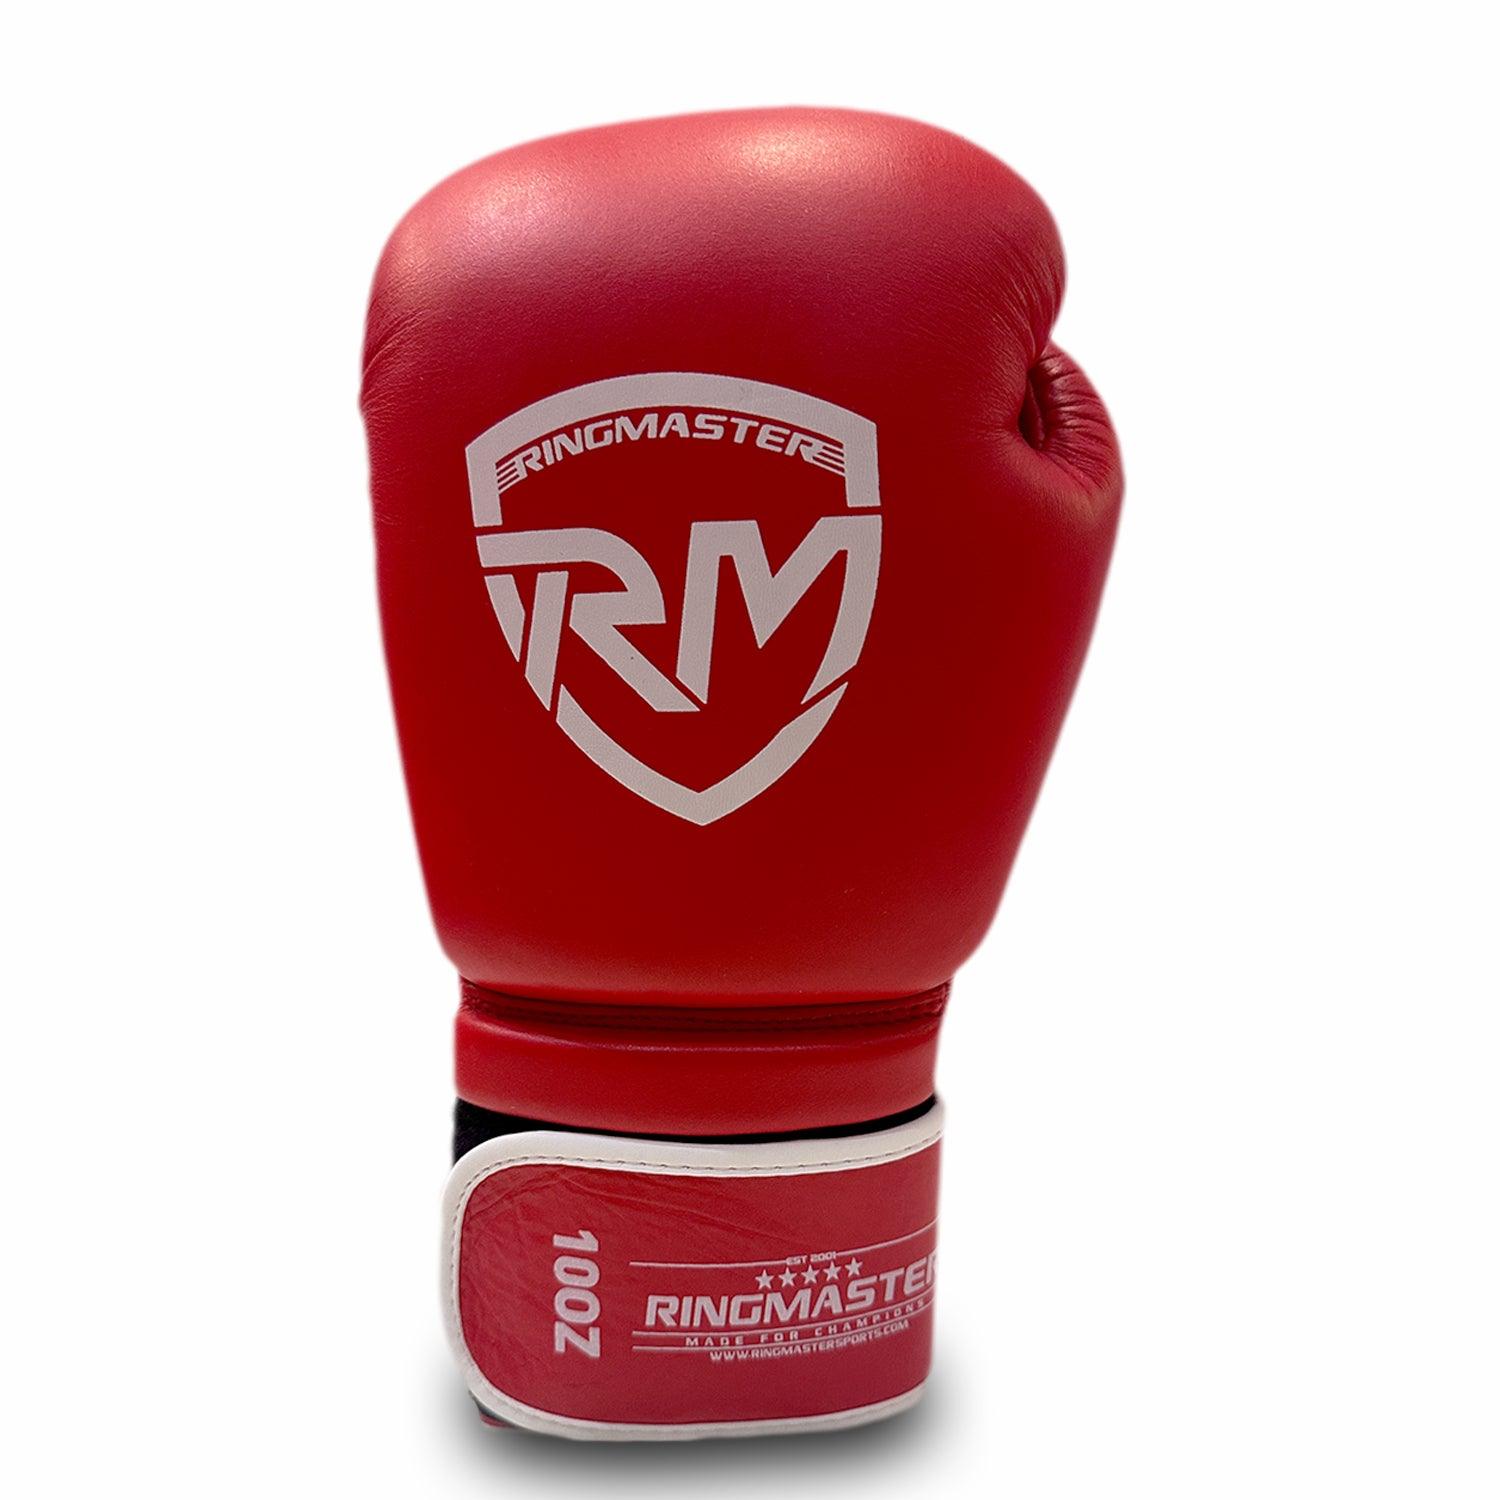 RingMaster Sports Boxing Gloves Champion Series IBA Styled Genuine Leather Red - RINGMASTER SPORTS - Made For Champions